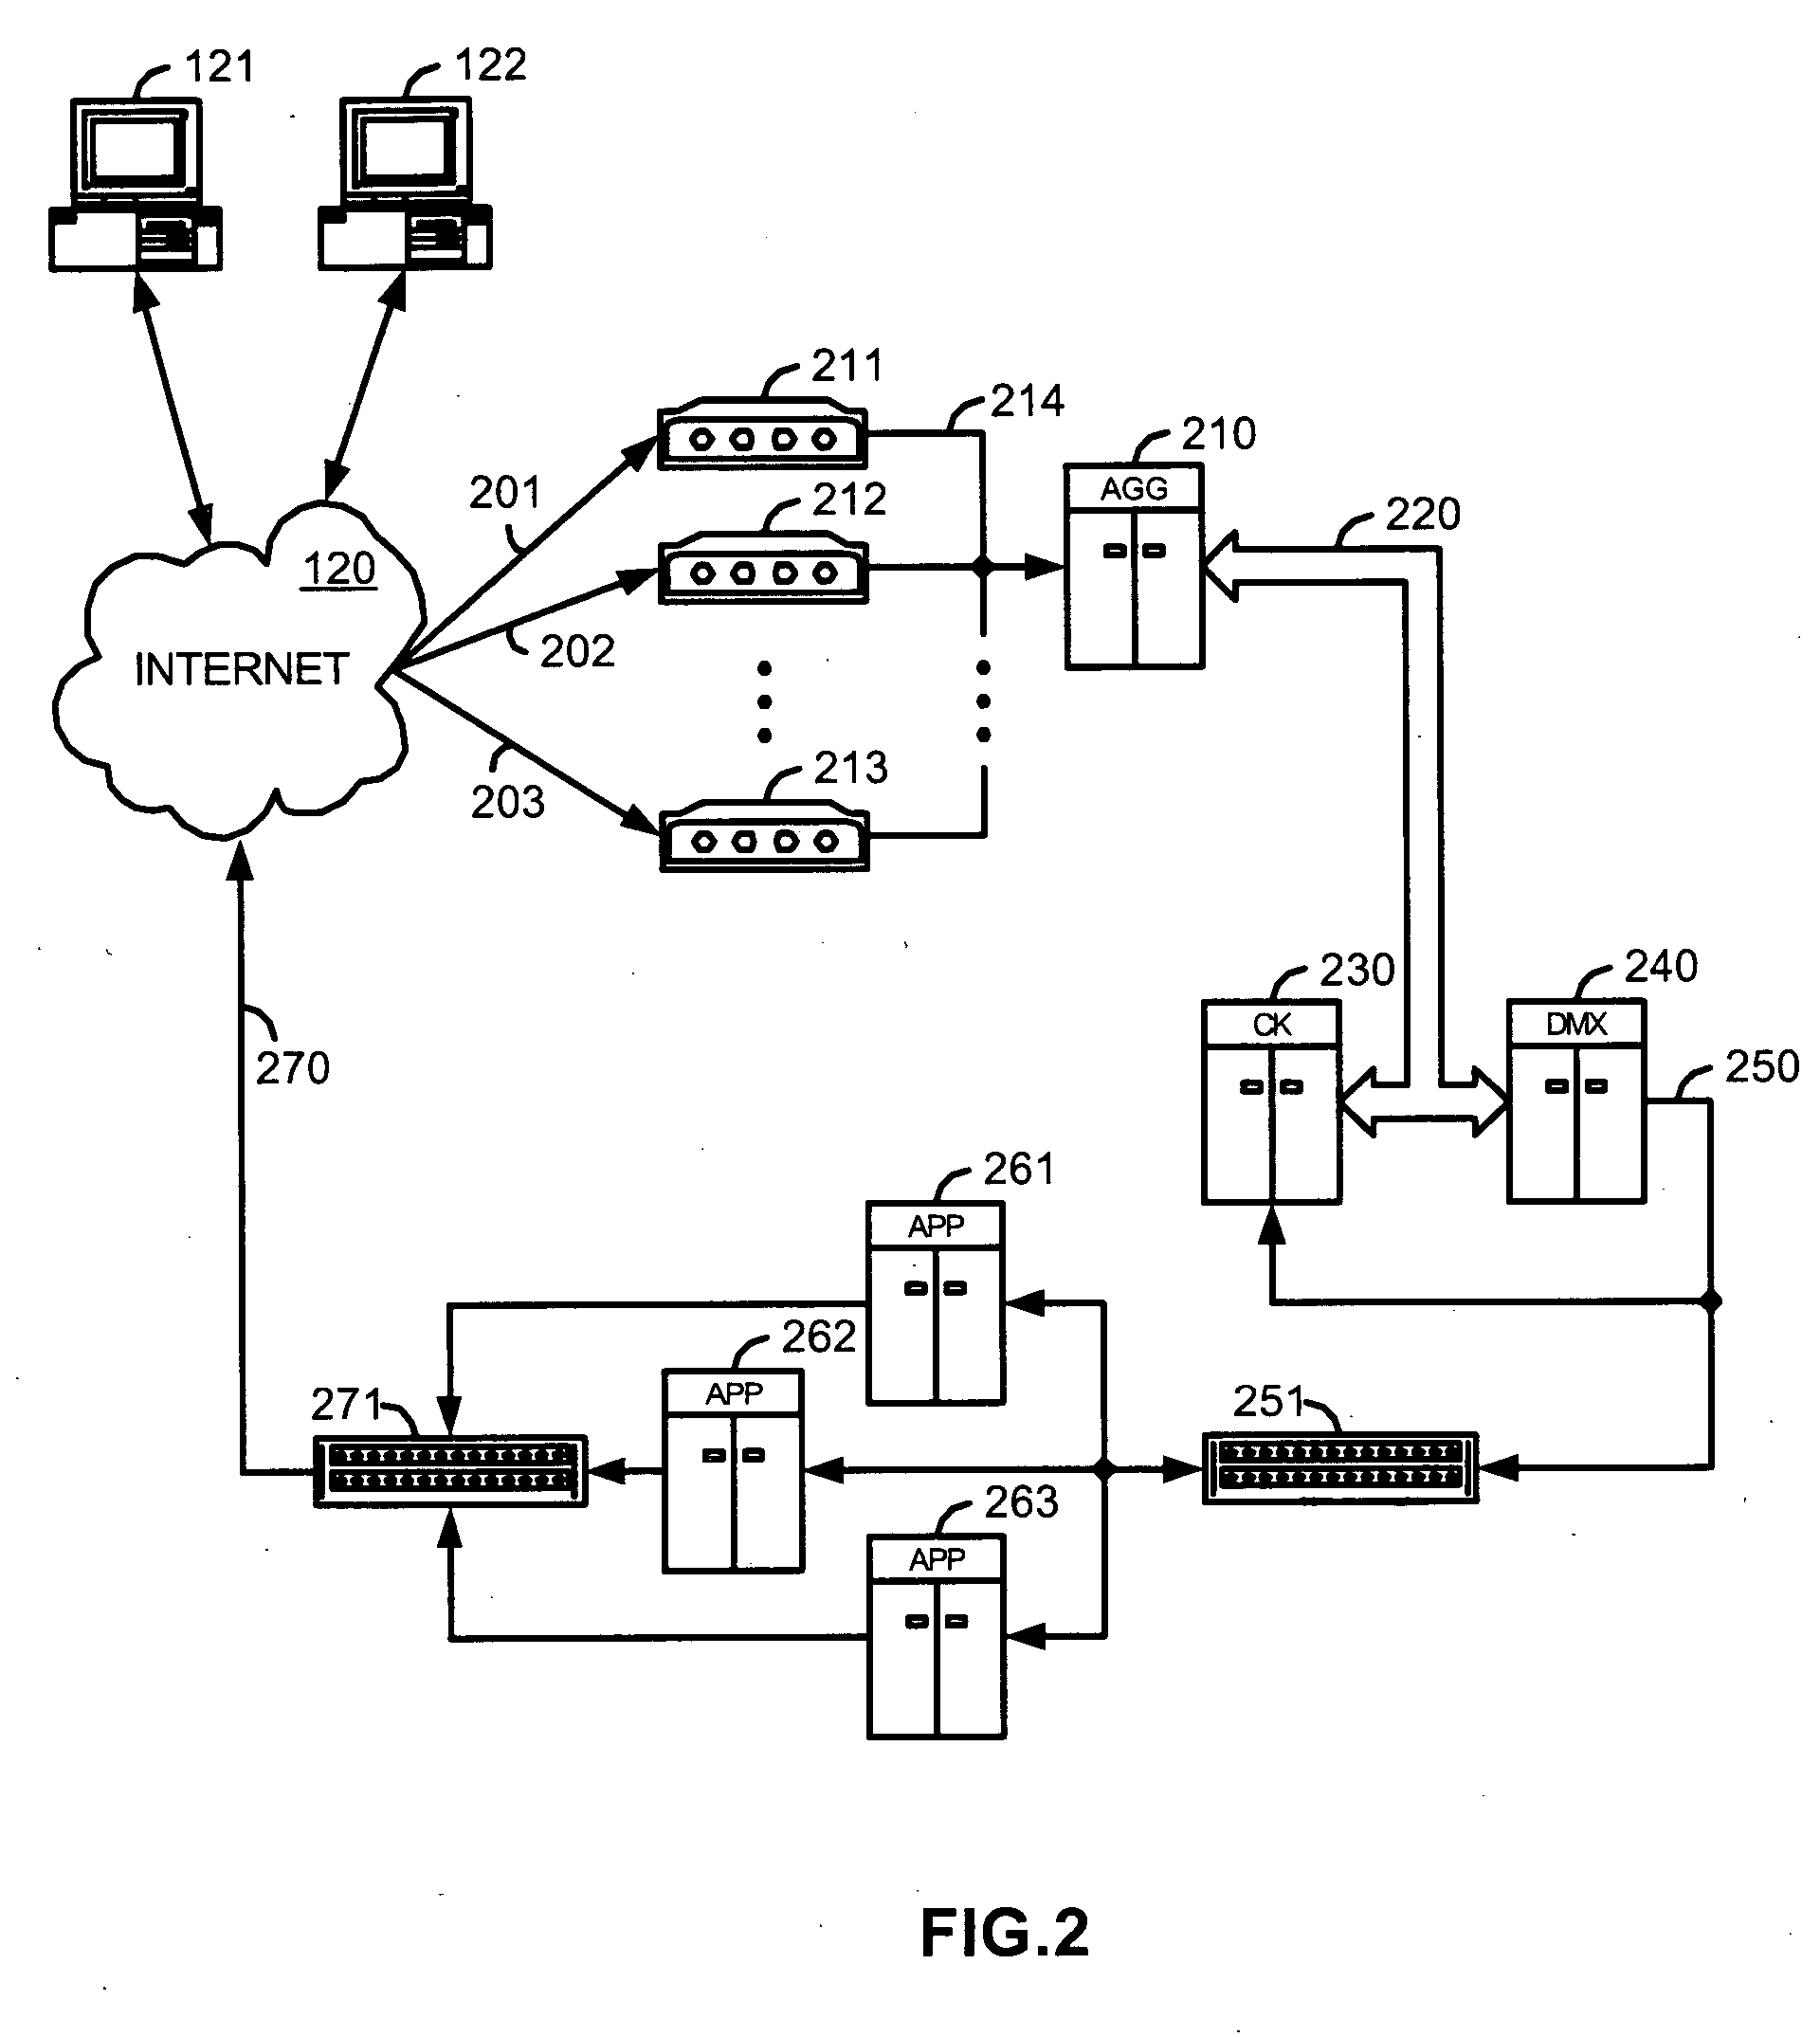 System and methods for communicating over the internet with geographically distributed devices of a decentralized network using transparent asymetric return paths